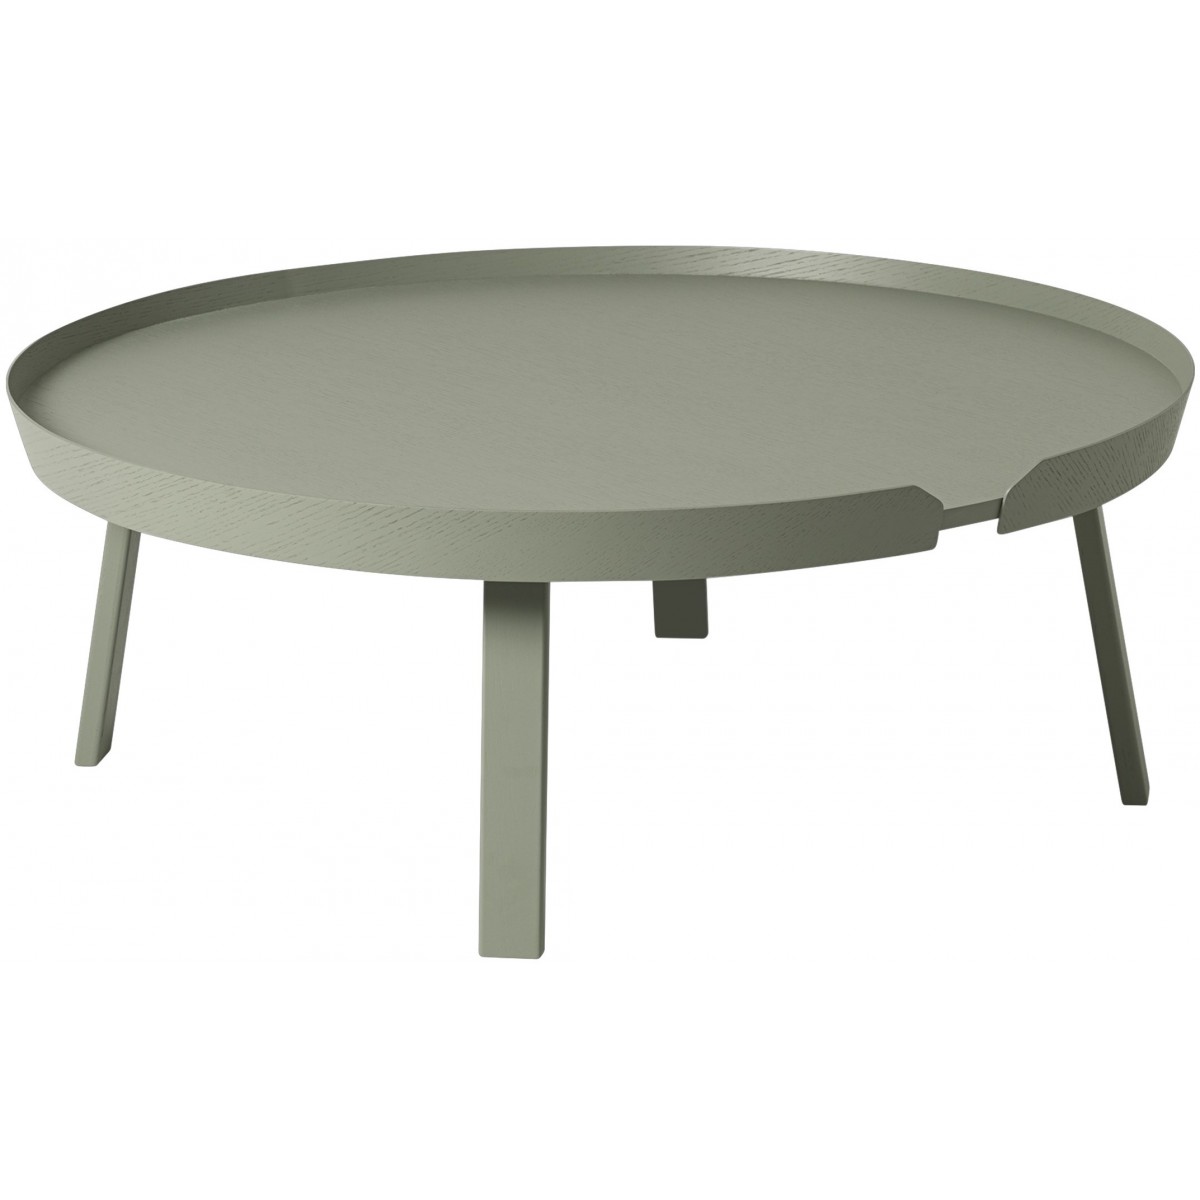 dusty green - XL - Around table